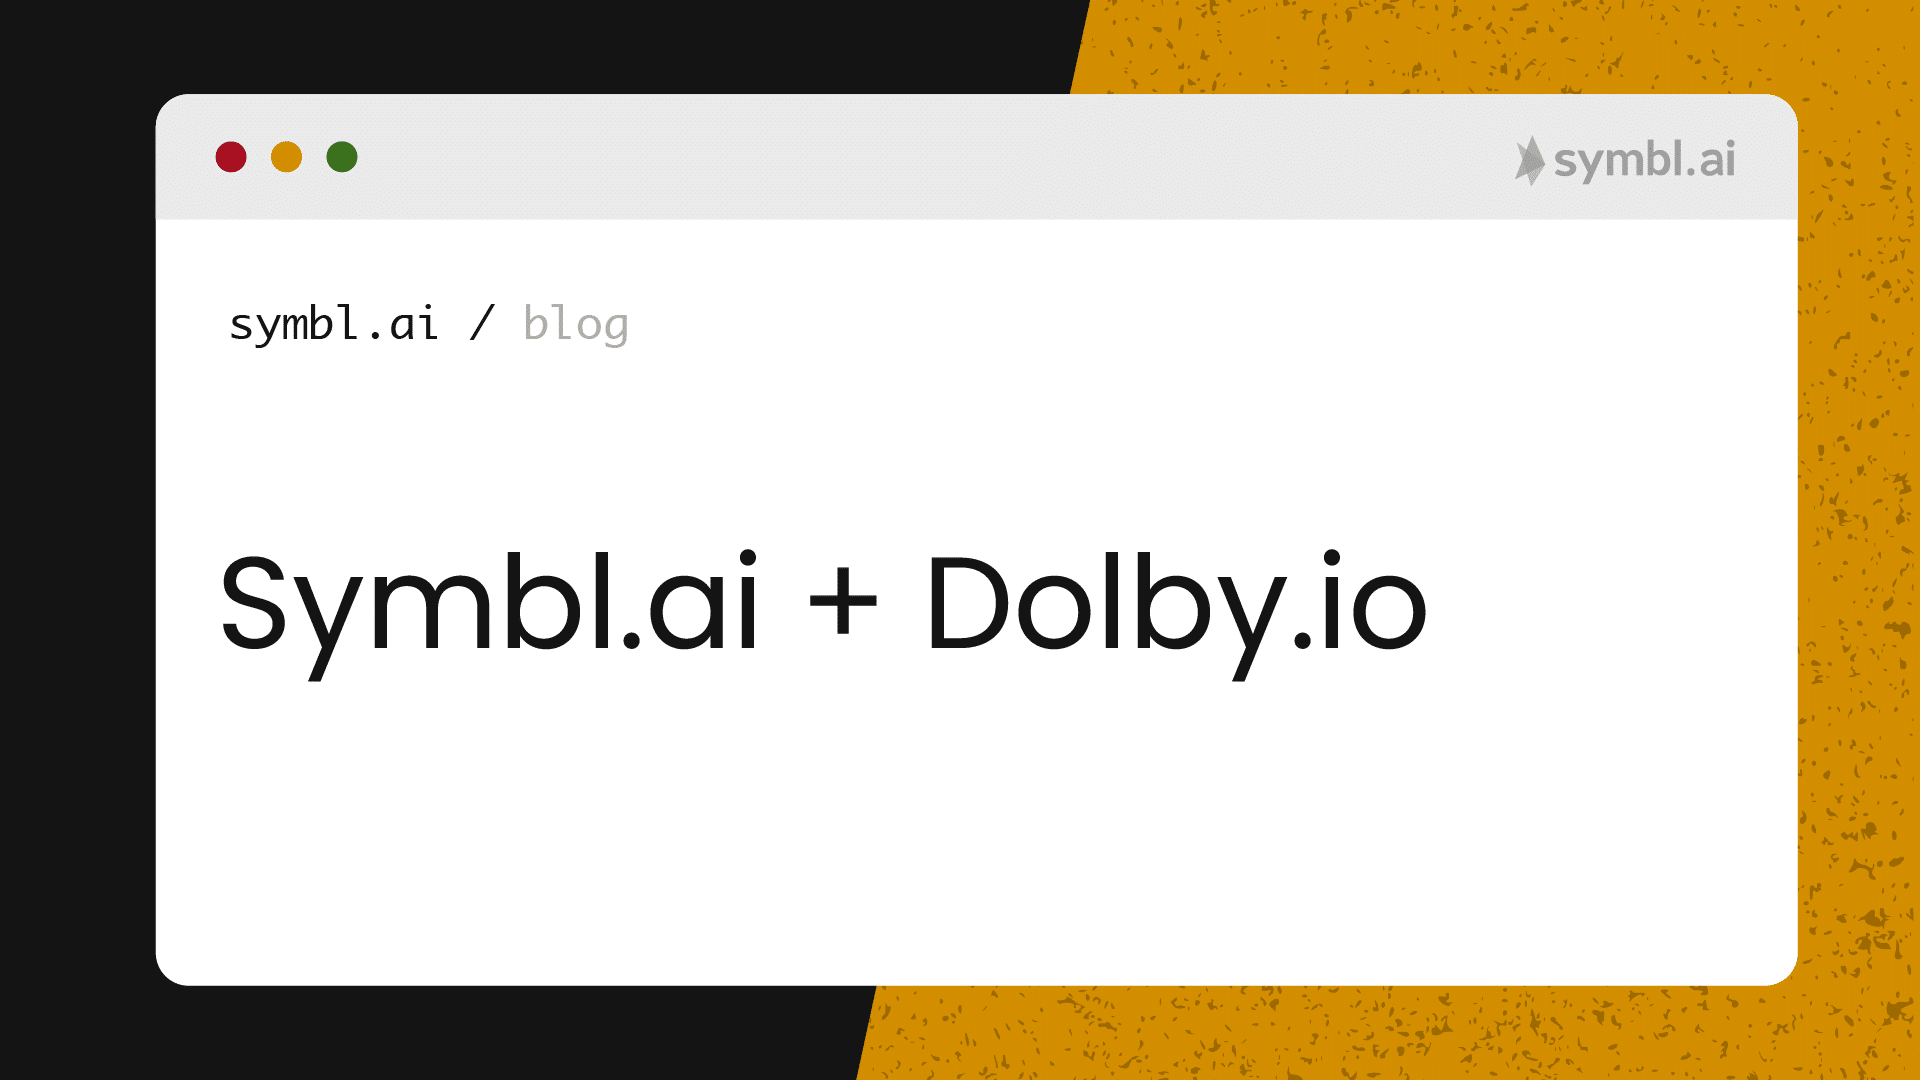 Generate enhanced analytics for your audio or video conversations with Dolby.io Symbl.ai